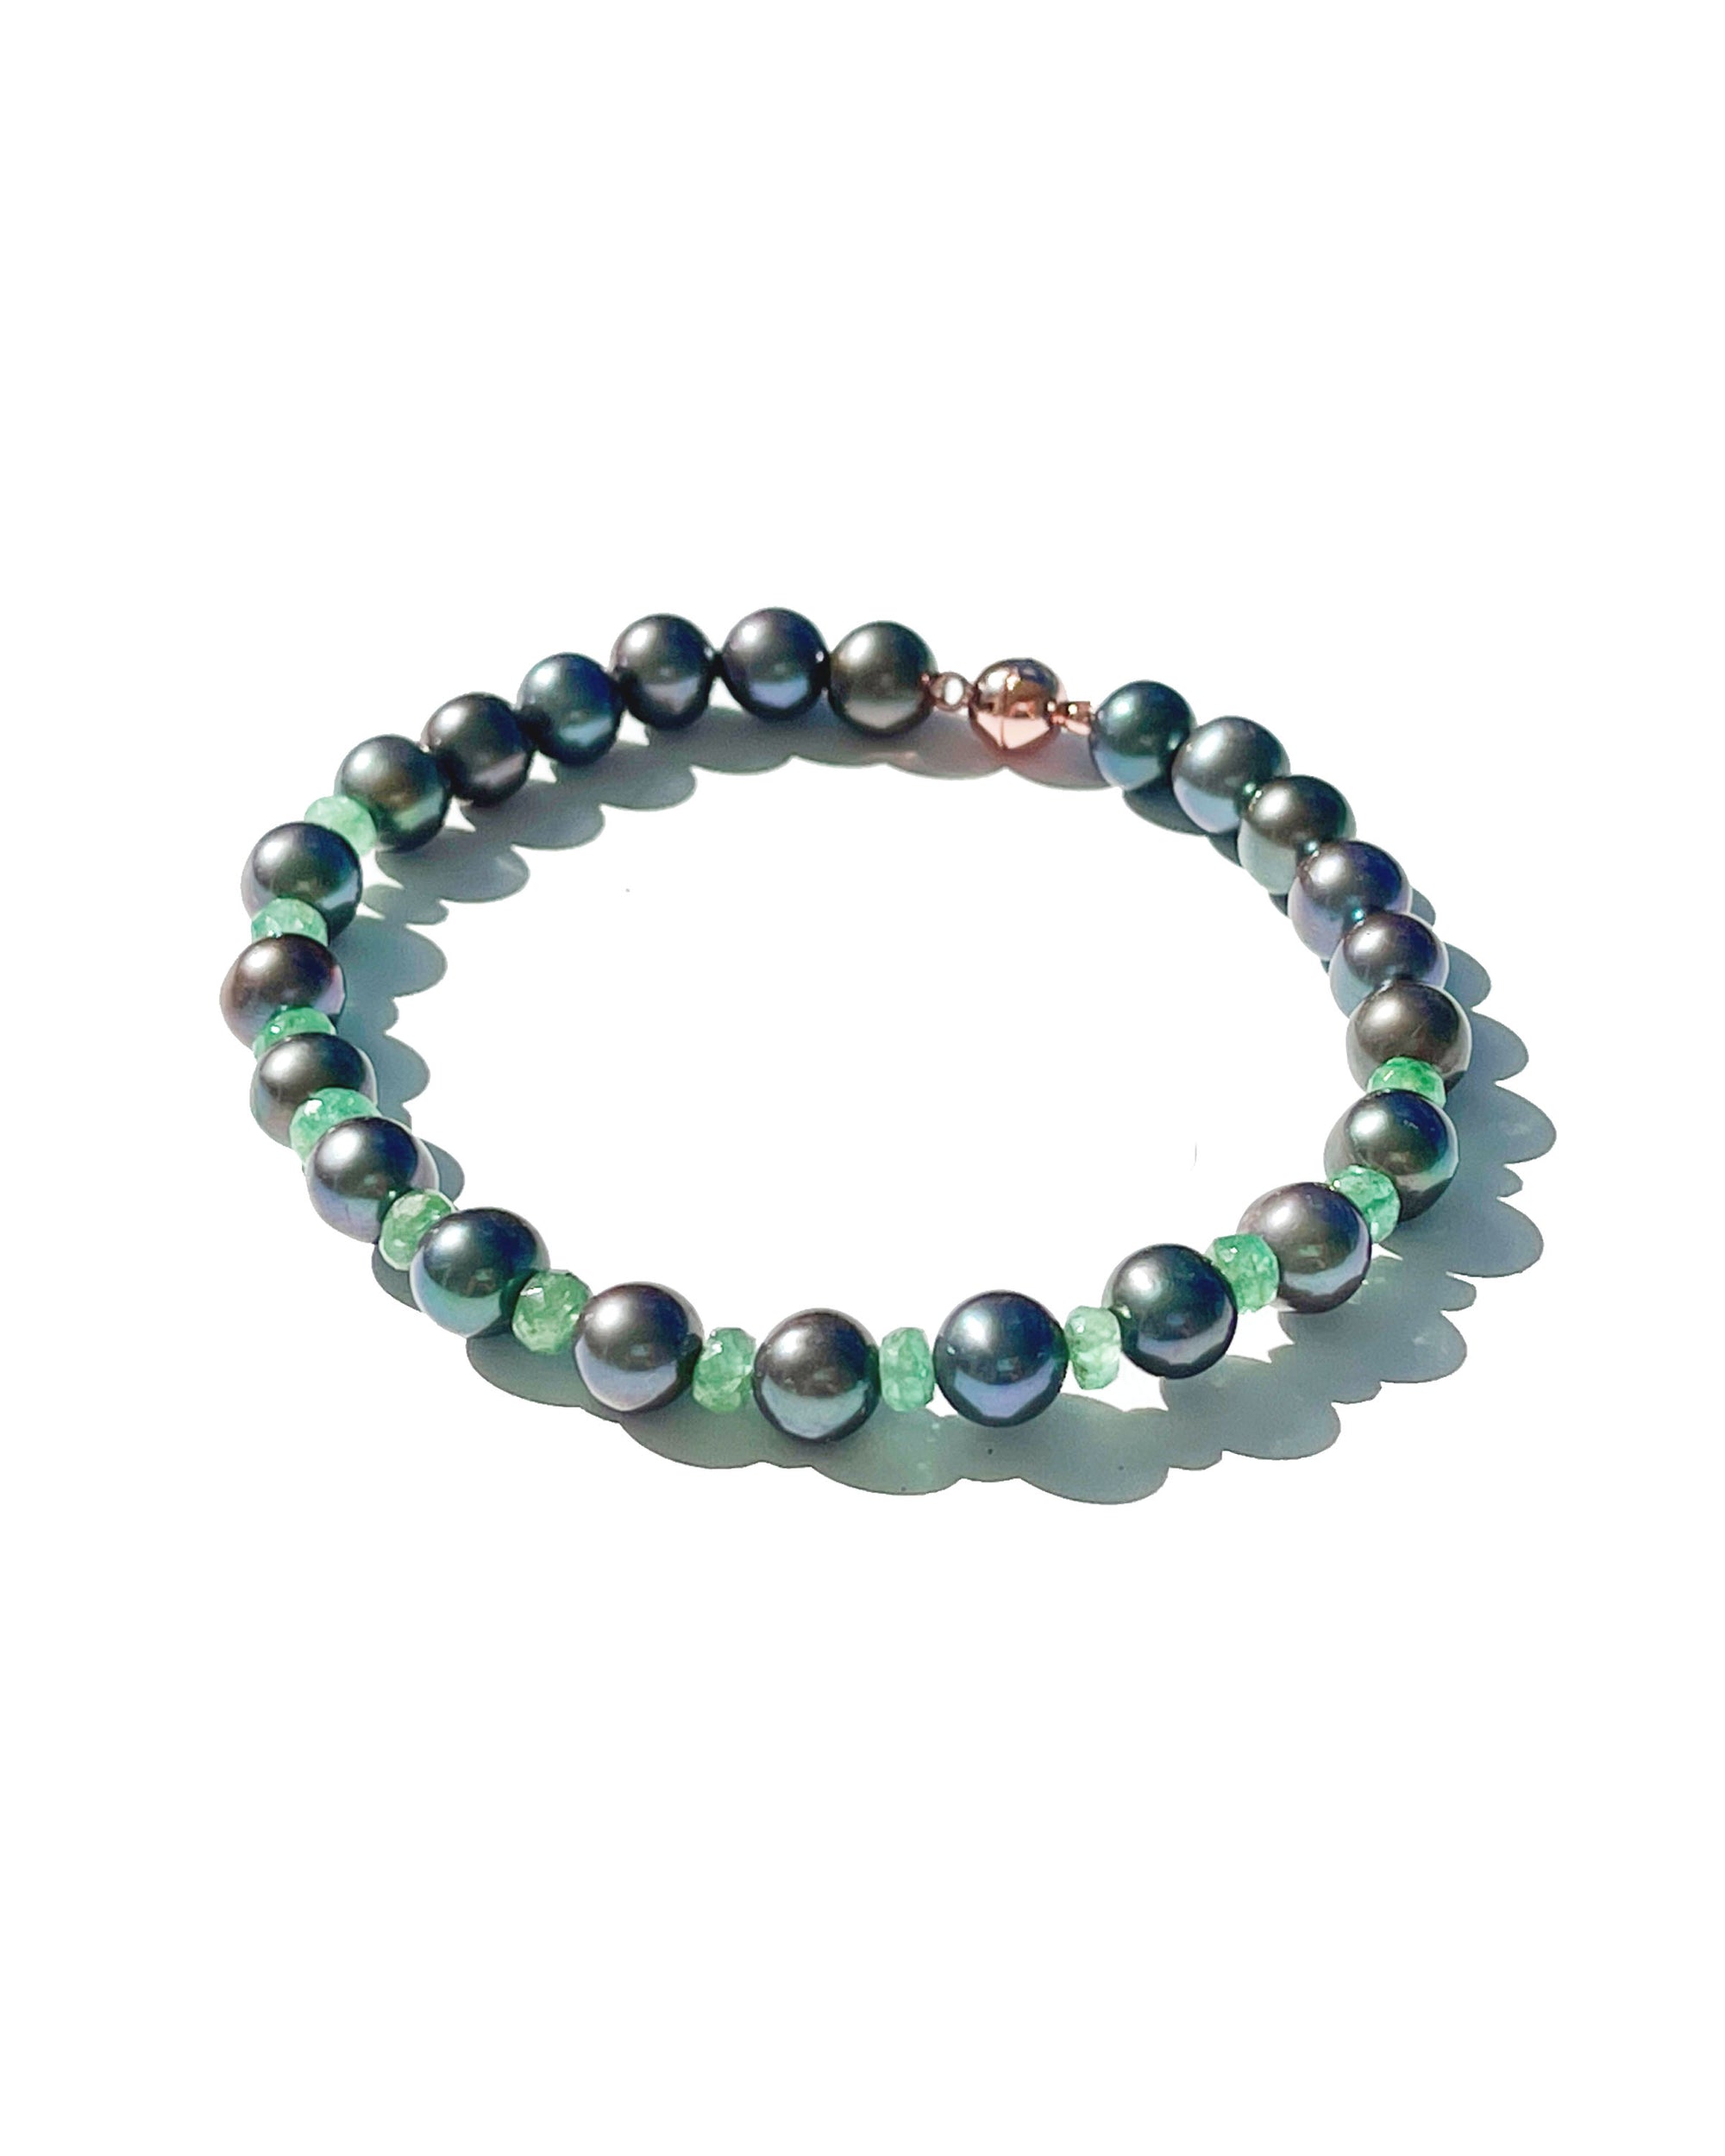 Men's Black Pearl Bracelet with Hand-Selected Colombian Emeralds